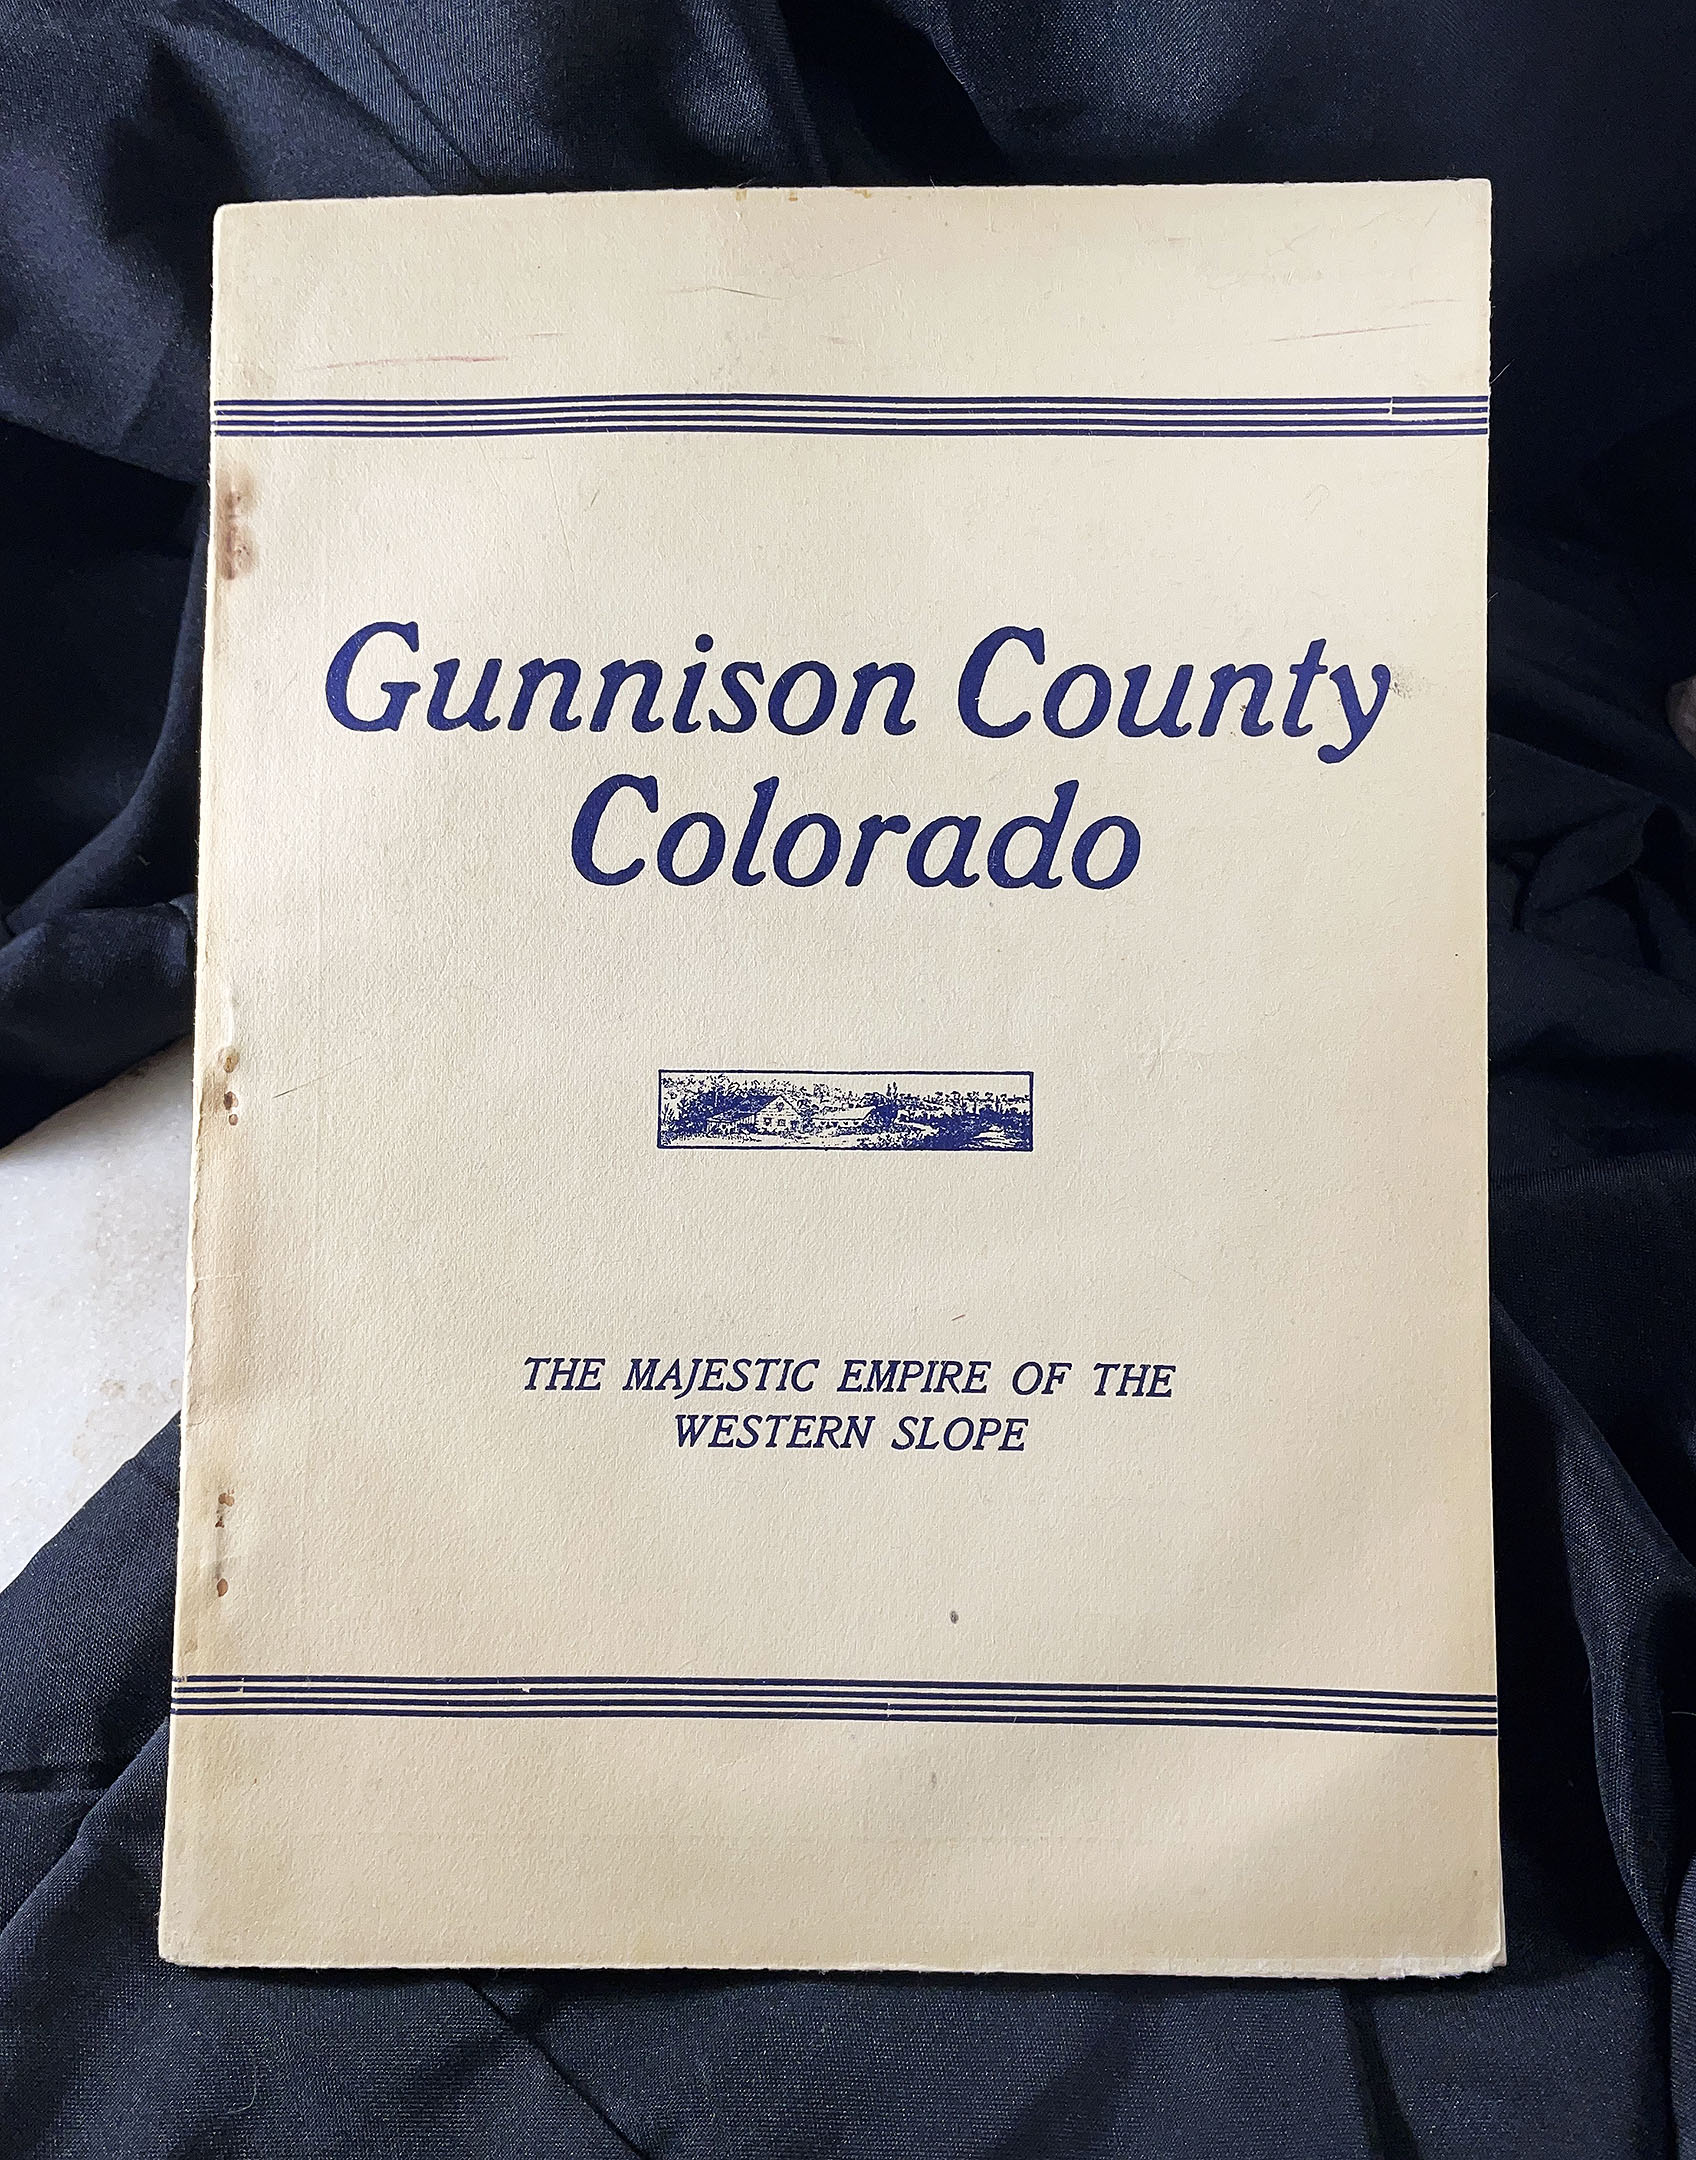 GUNNISON COUNTY COLORADO Majestic Empire of Western Slope promotional book by A. P. Nelson 1916